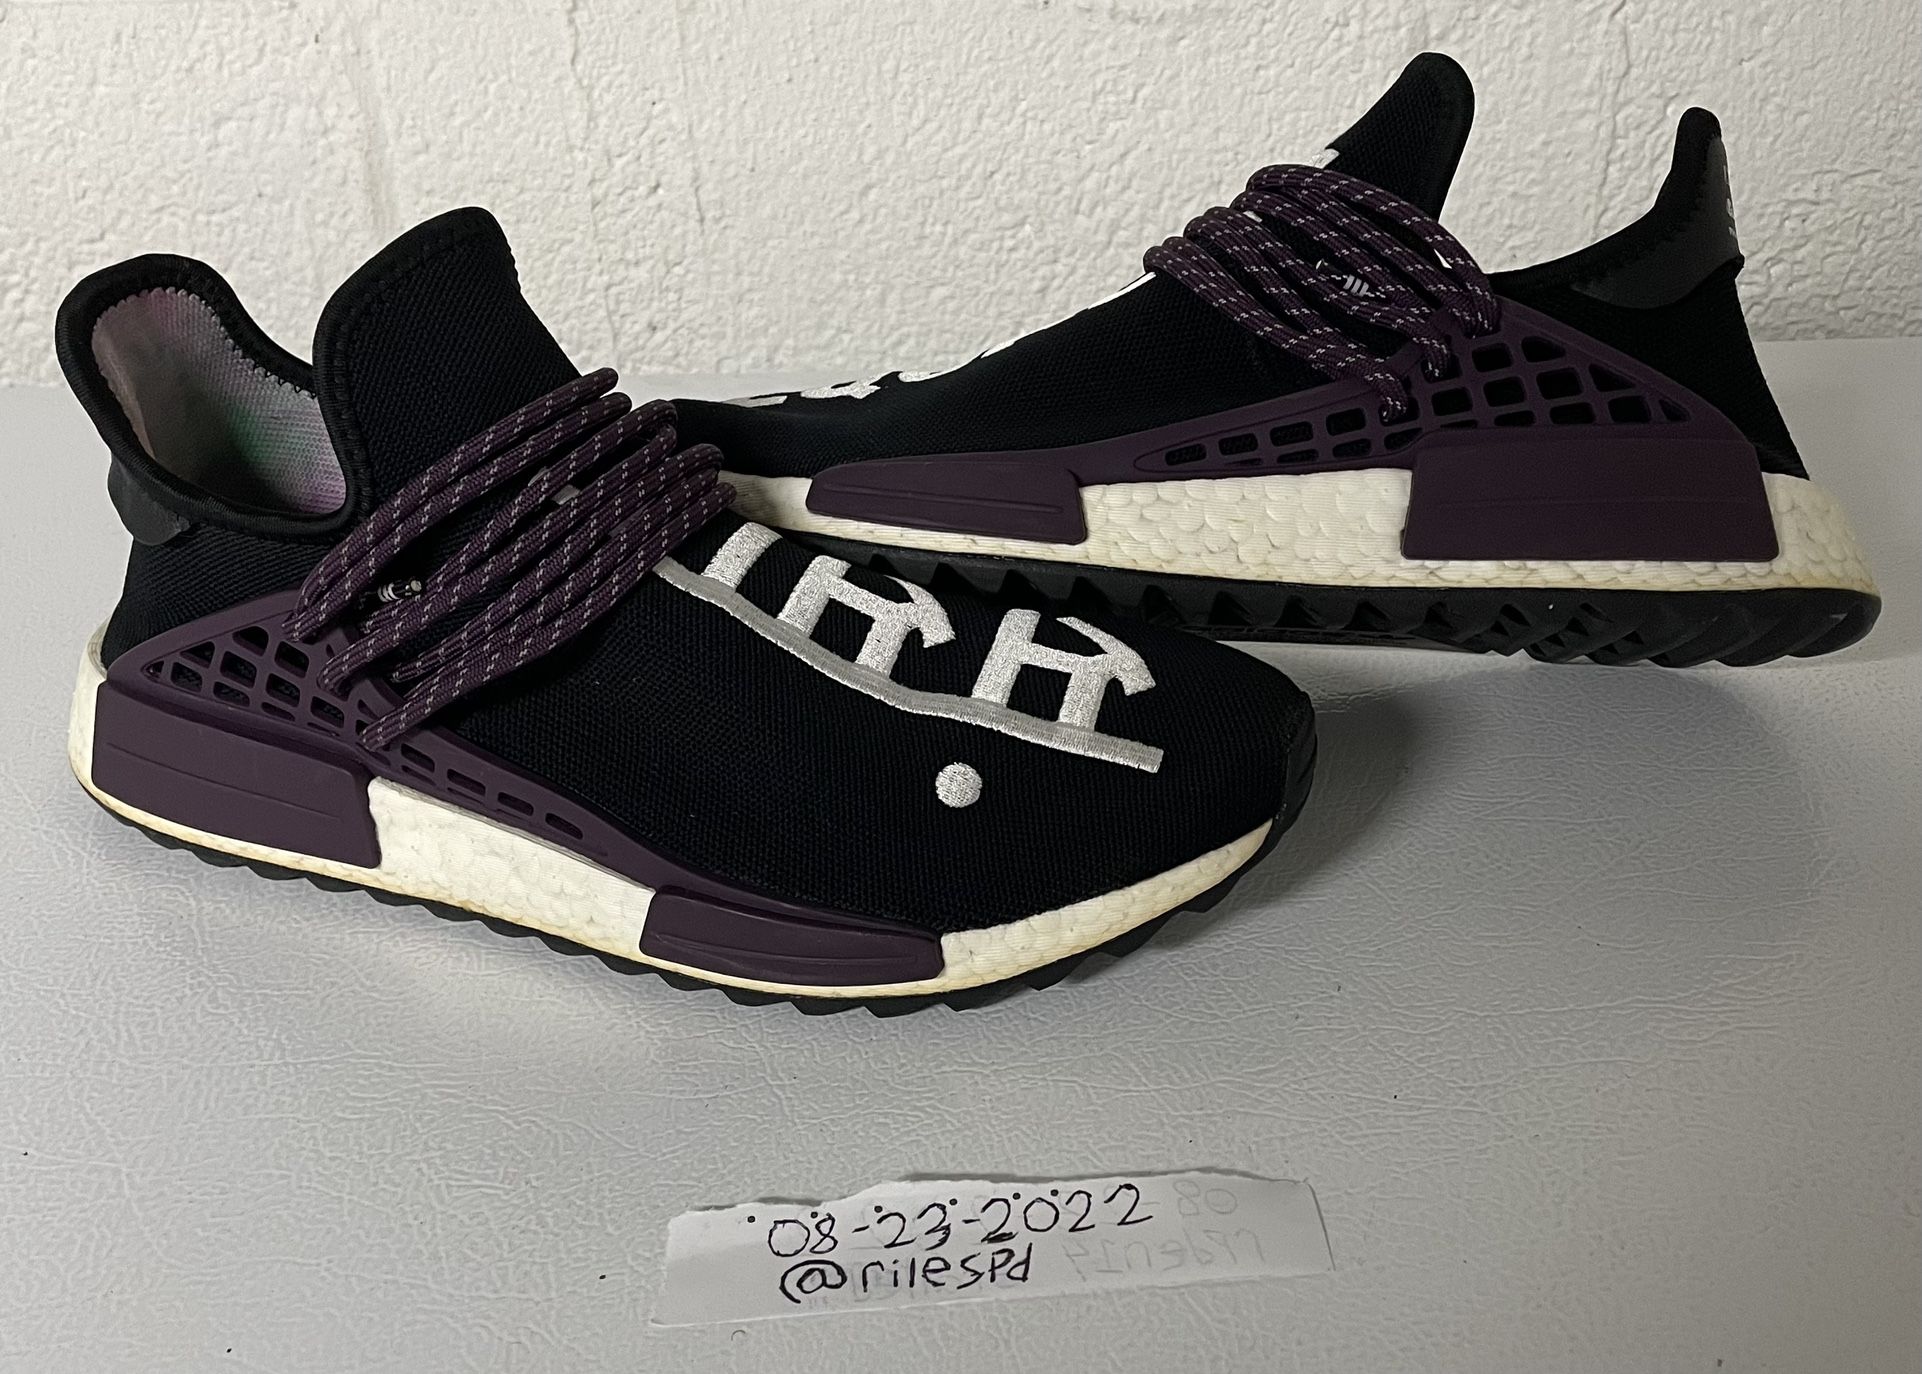 adidas NMD Human Race Trail x Pharrell Equality Holi Festival AC7033 Size 11.5 Sale in Hills, OH - OfferUp